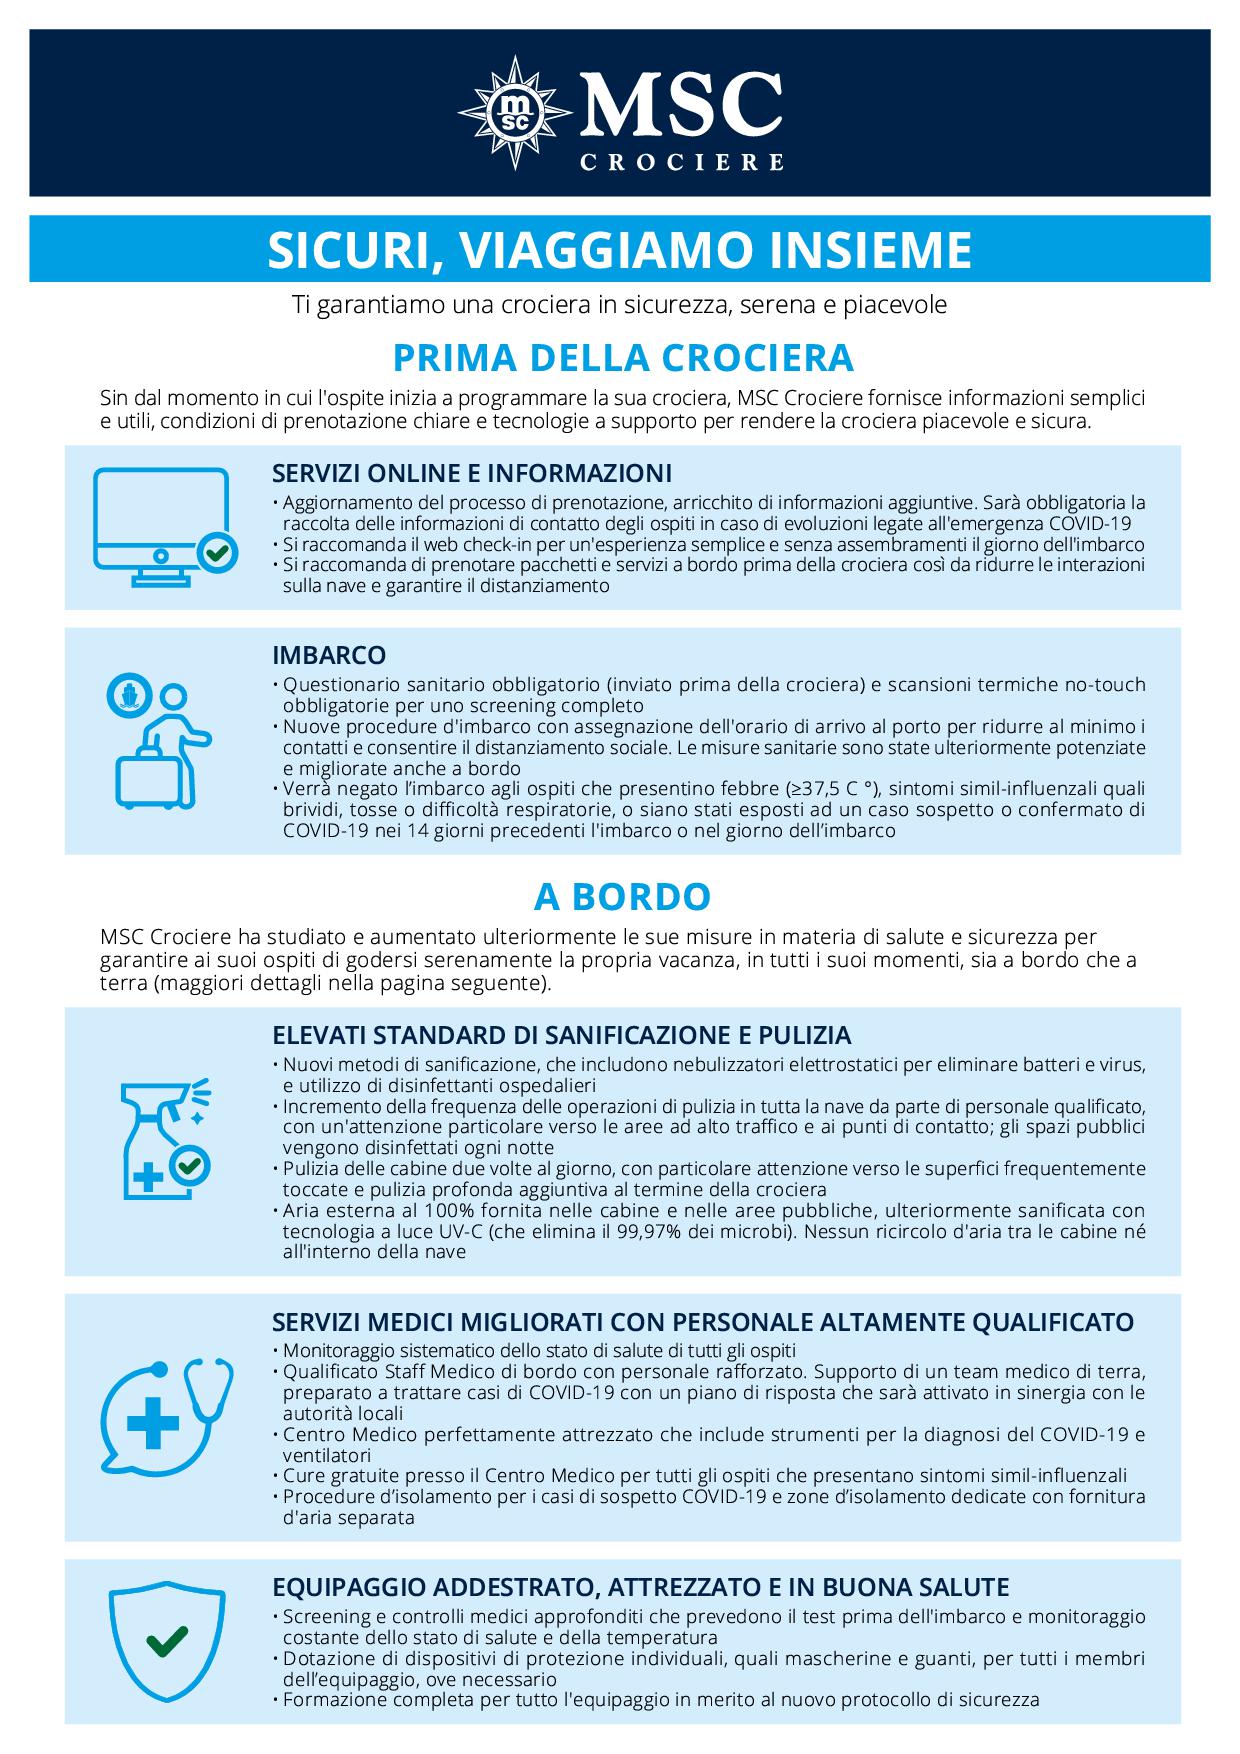 HEALTH_MEASURES_ITALY